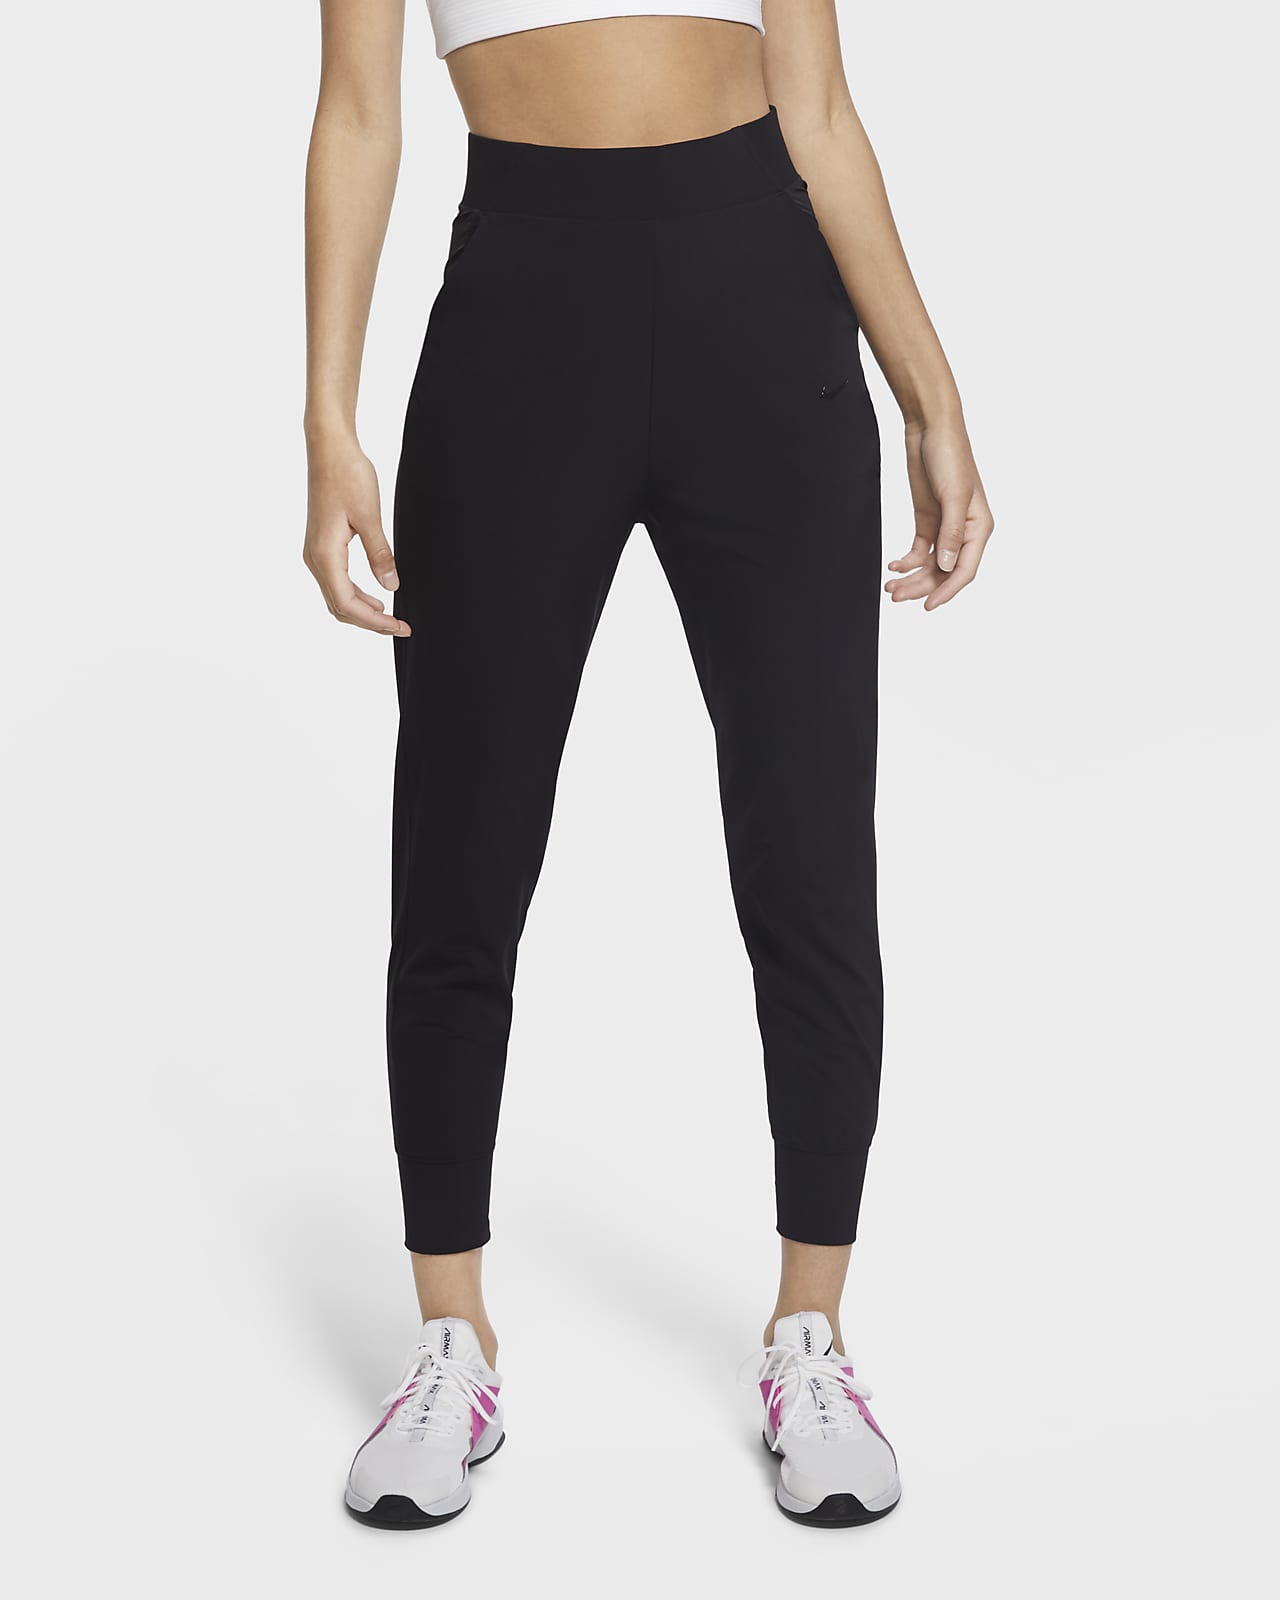 Nike Cargo Trousers & Pants for Women sale - discounted price | FASHIOLA  INDIA